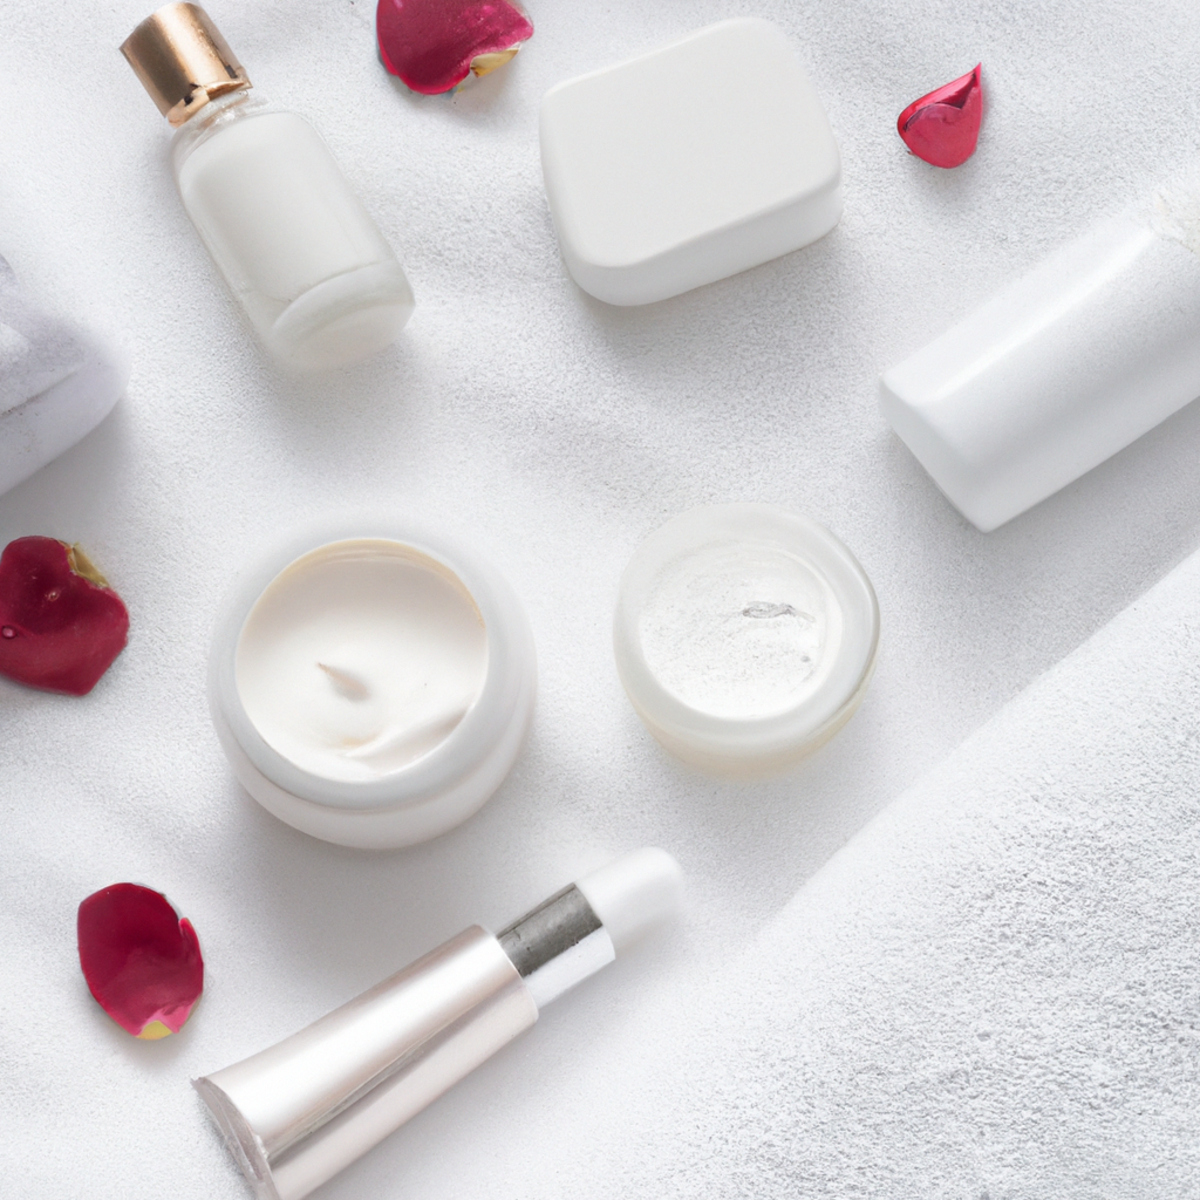 Indulge in the ultimate self-care with these natural anti-aging products and techniques that promise to leave you with plump, youthful skin. This collection of hydrating serum, firming eye cream, collagen-boosting powder, and rich, creamy moisturizer is specifically designed to combat signs of aging and promote a more youthful appearance. Incorporating these anti-aging products into your skincare routine can help reduce the appearance of fine lines and wrinkles, improve skin elasticity, and enhance overall radiance. Pair this indulgent regimen with a fluffy white towel and delicate rose petals for the ultimate spa-like experience in the comfort of your own home.